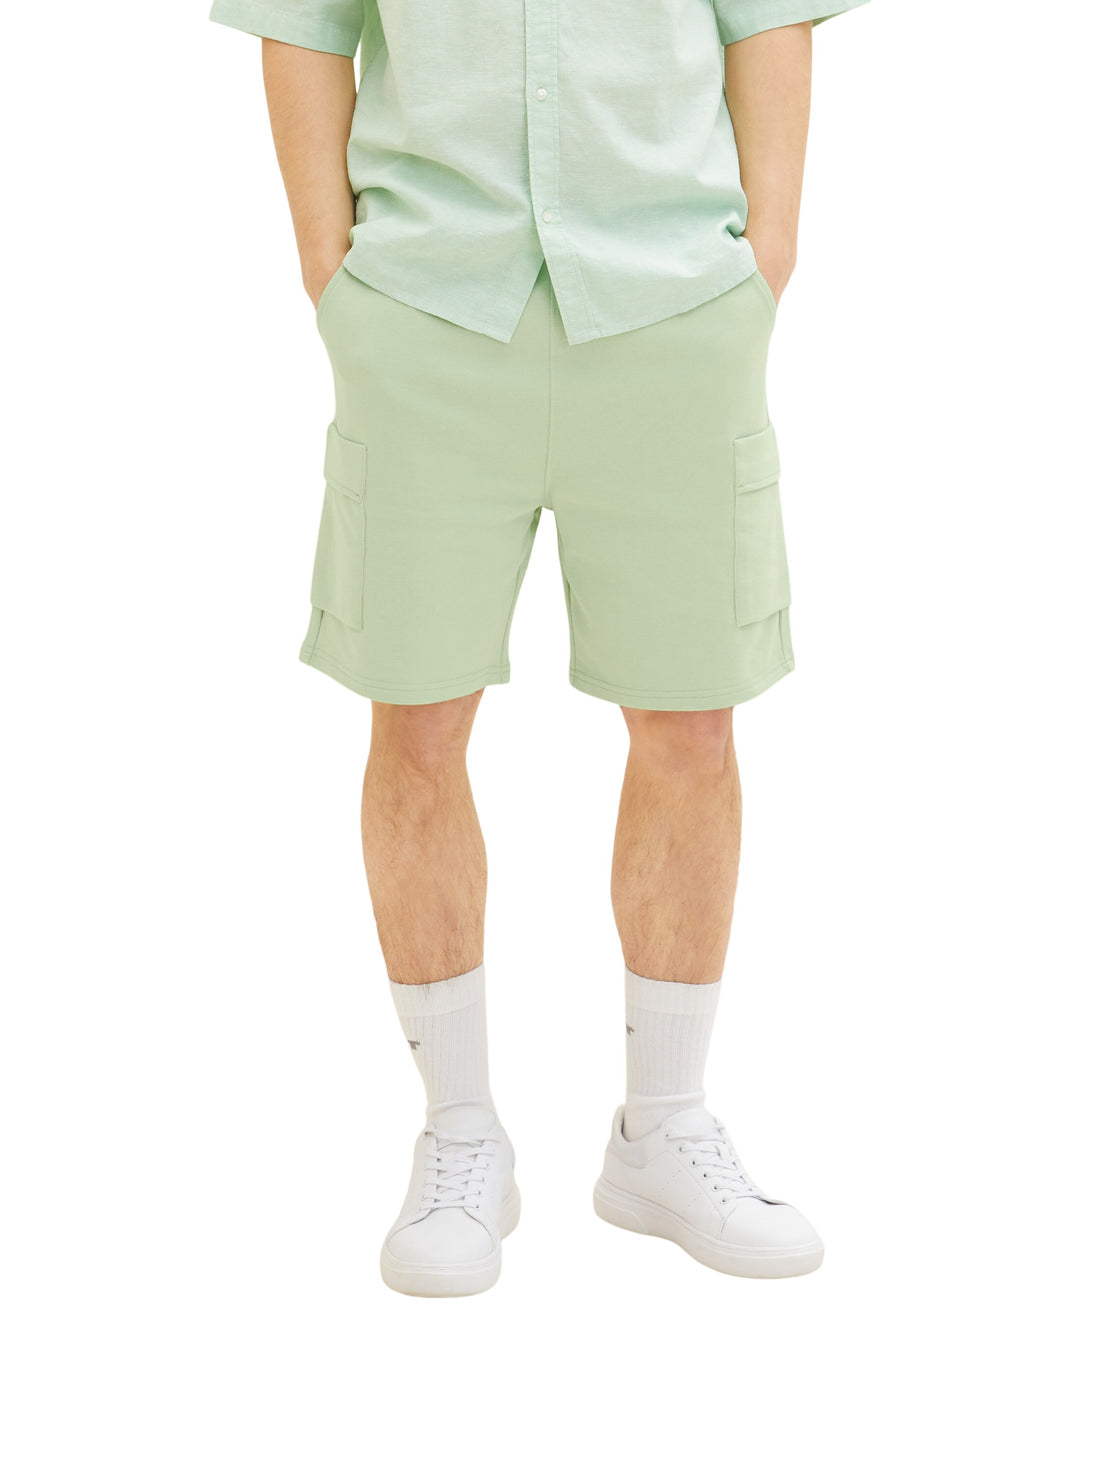 Green Knitted Shorts With Black Drawstring